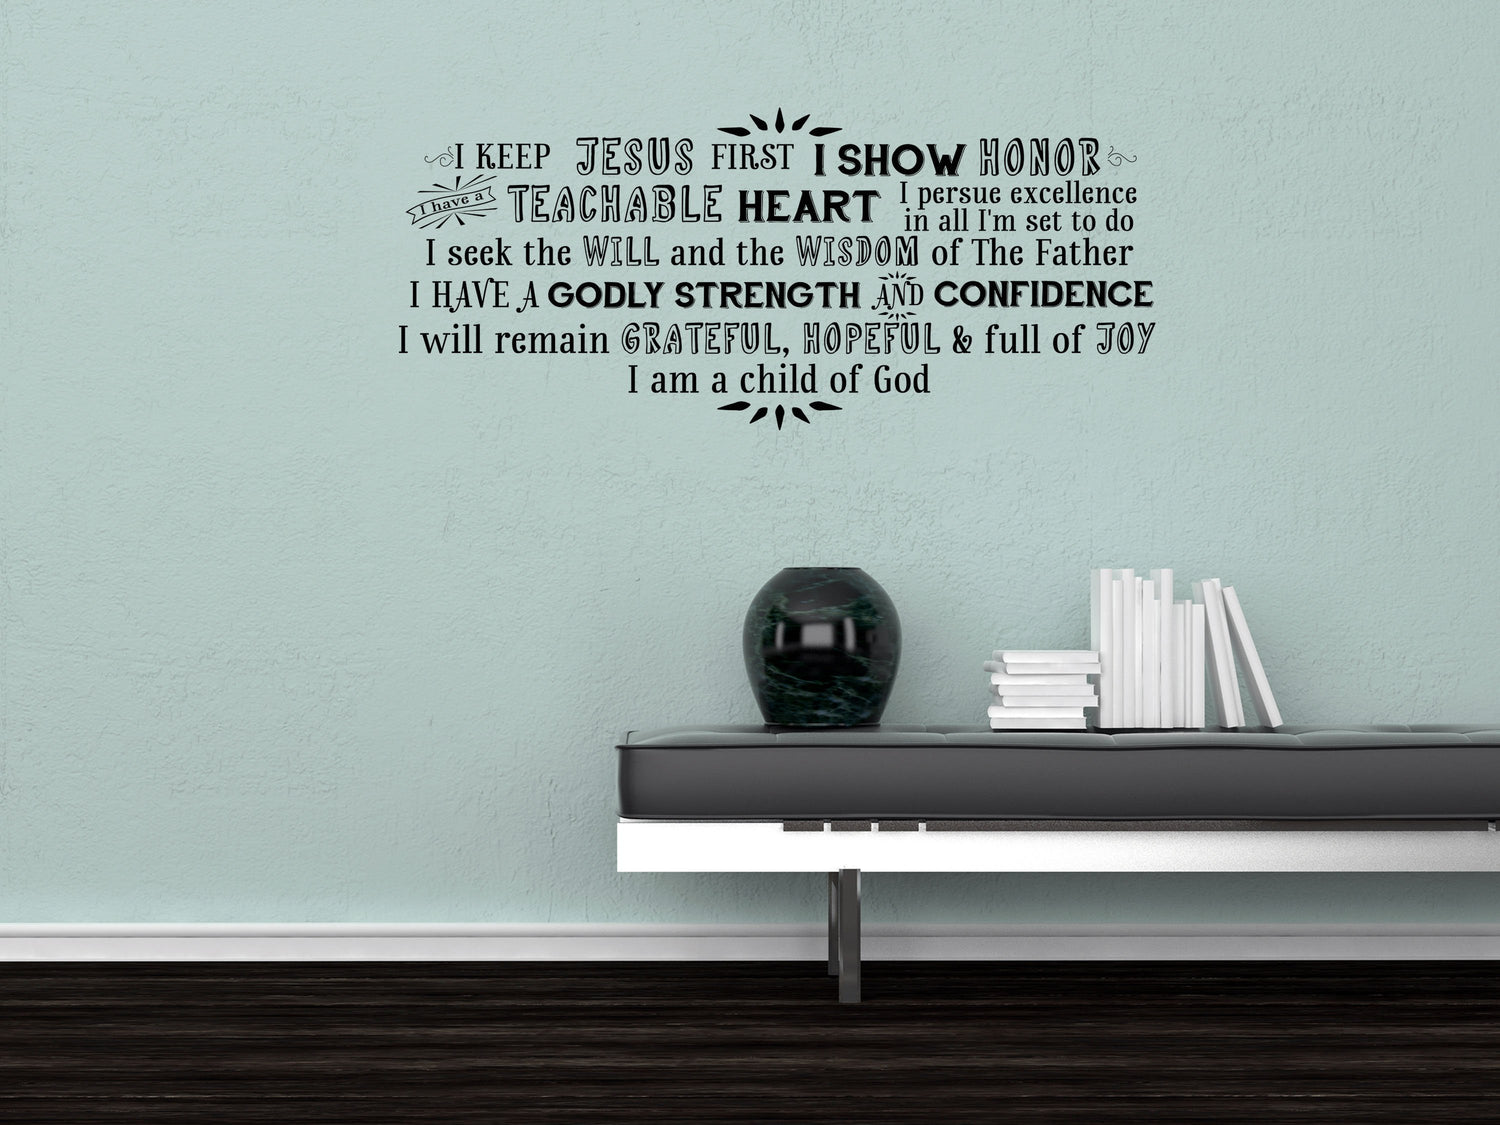 Jesus Vinyl Wall Decal Word Cloud - Godly Inspirational Wisdom Confidence Decal Vinyl Wall Decal Done 